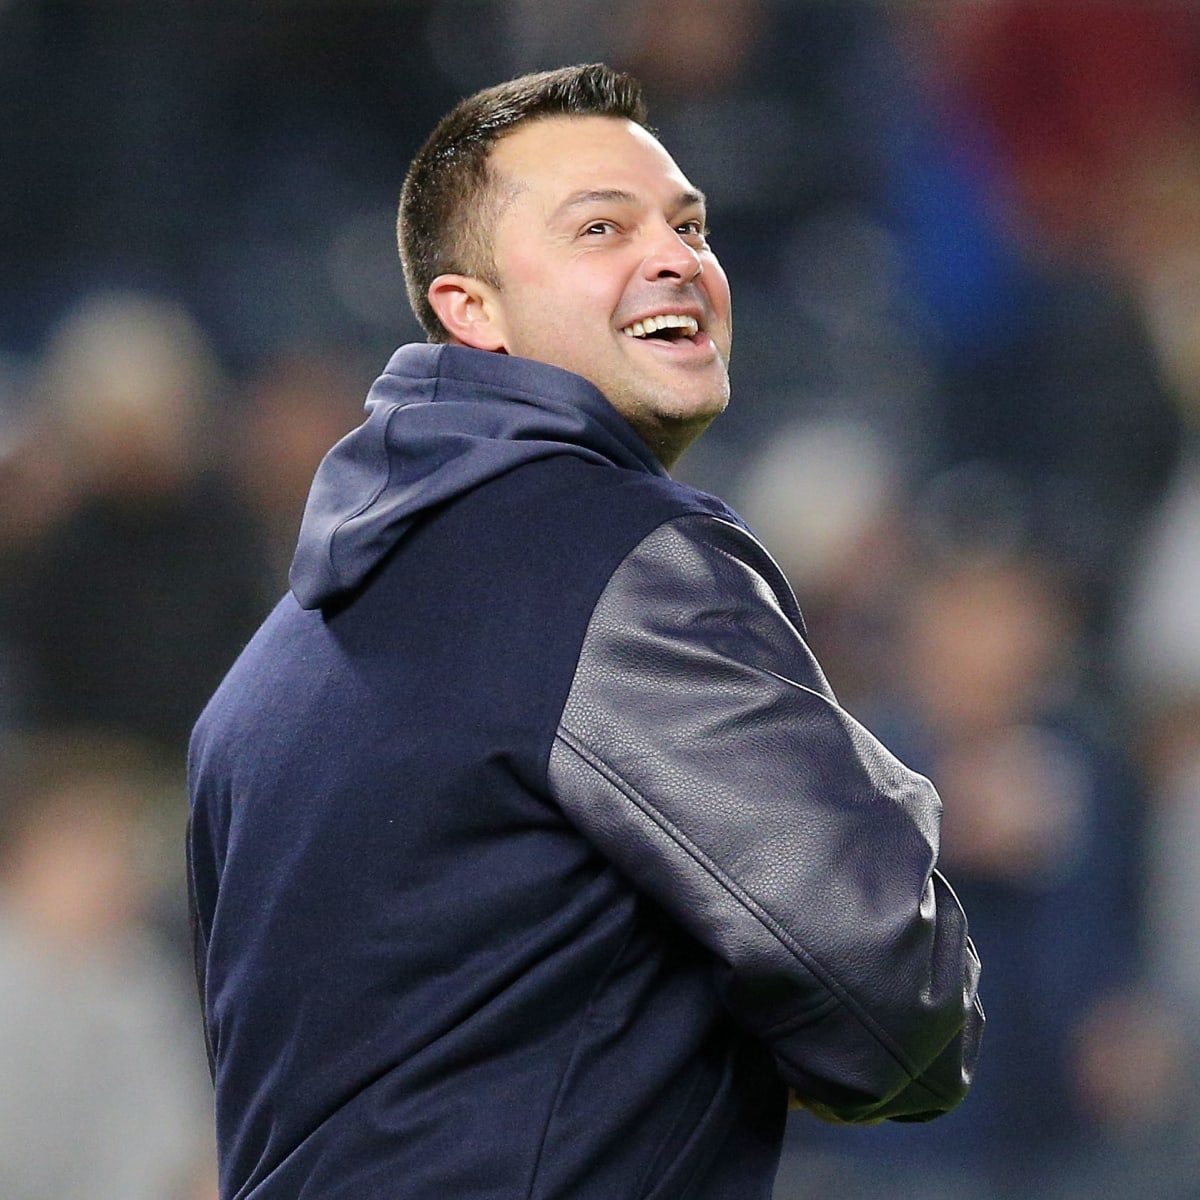 Seven teams reportedly interested in Nick Swisher - Sports Illustrated